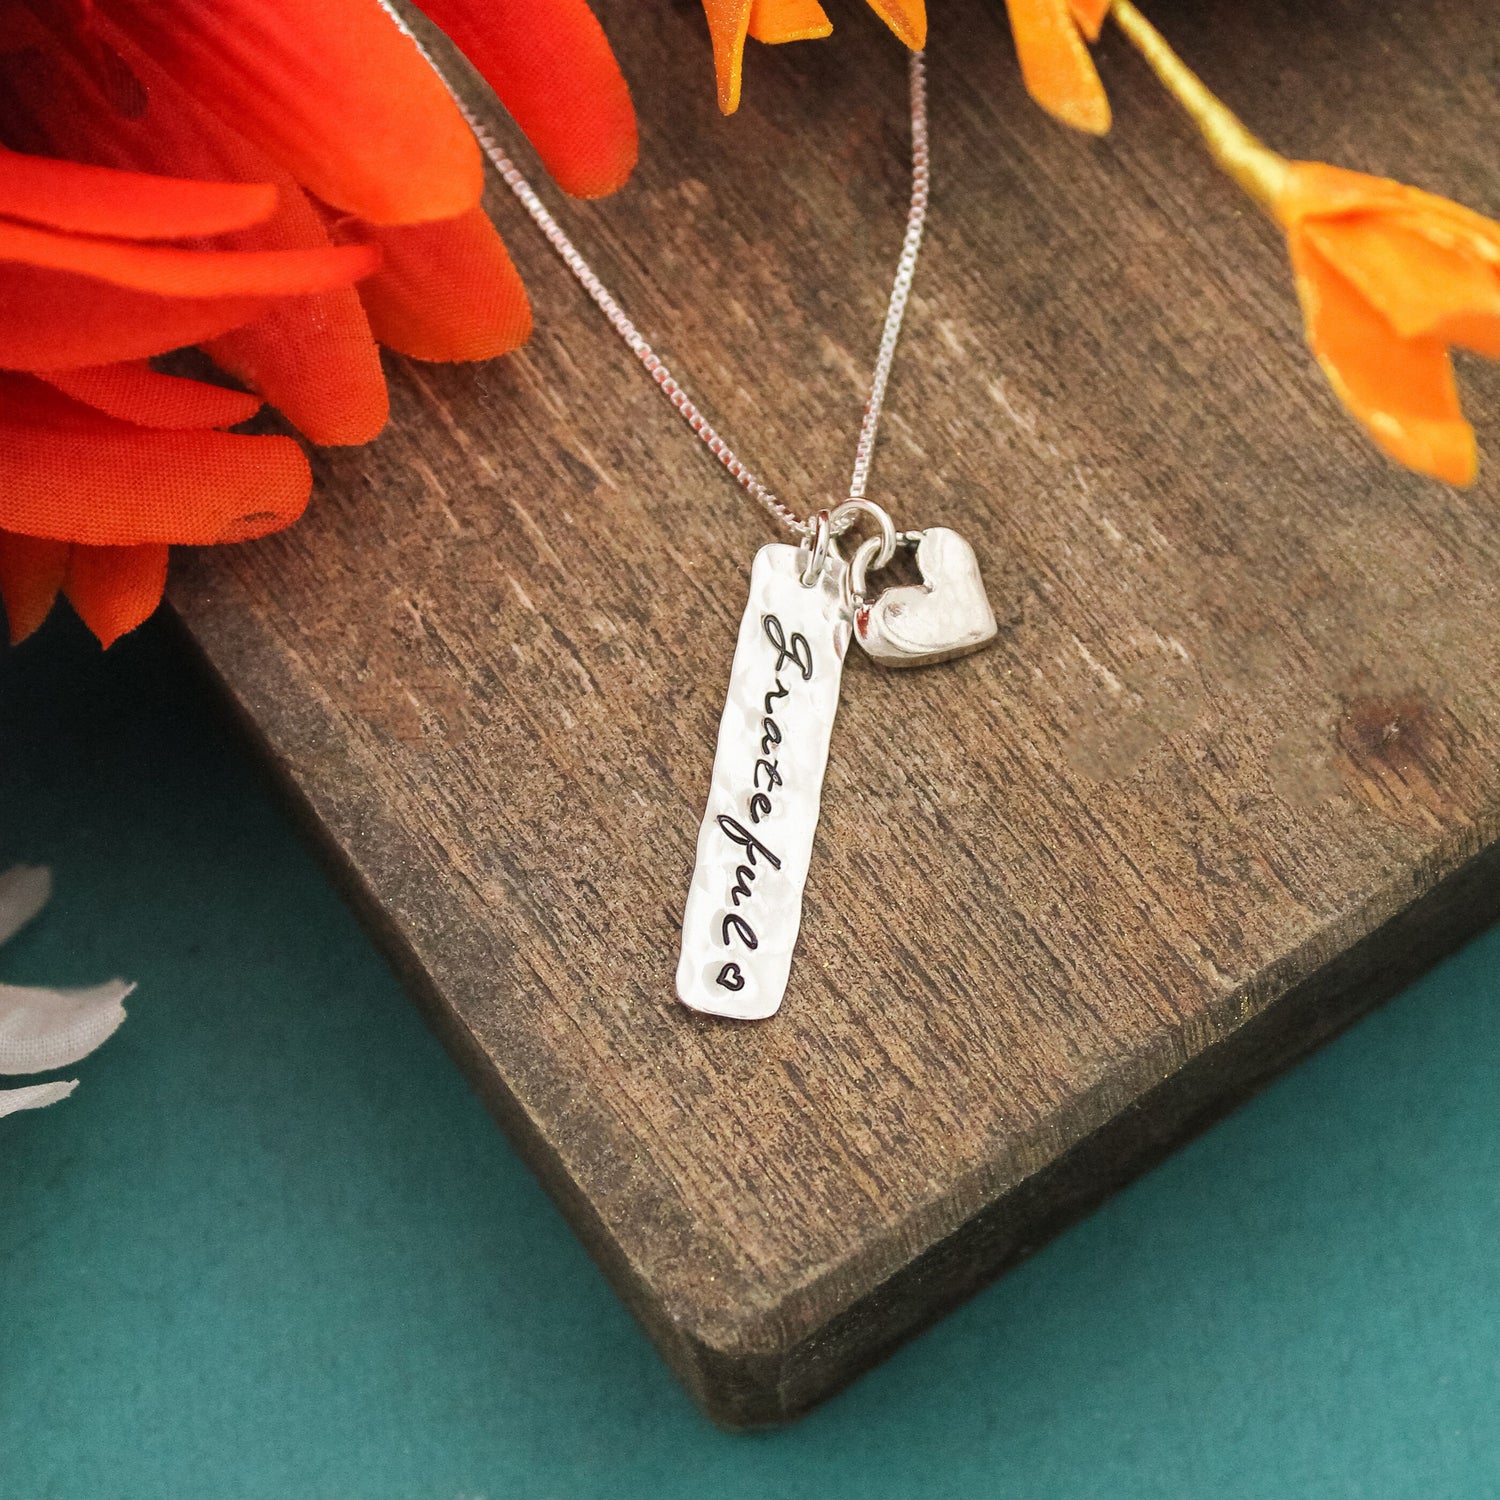 GRATEFUL Tag Necklace, Thankful Necklace, Grateful Jewelry, Thanksgiving Hostess Gift, Hand Stamped Necklace, Personalized Jewelry for Her